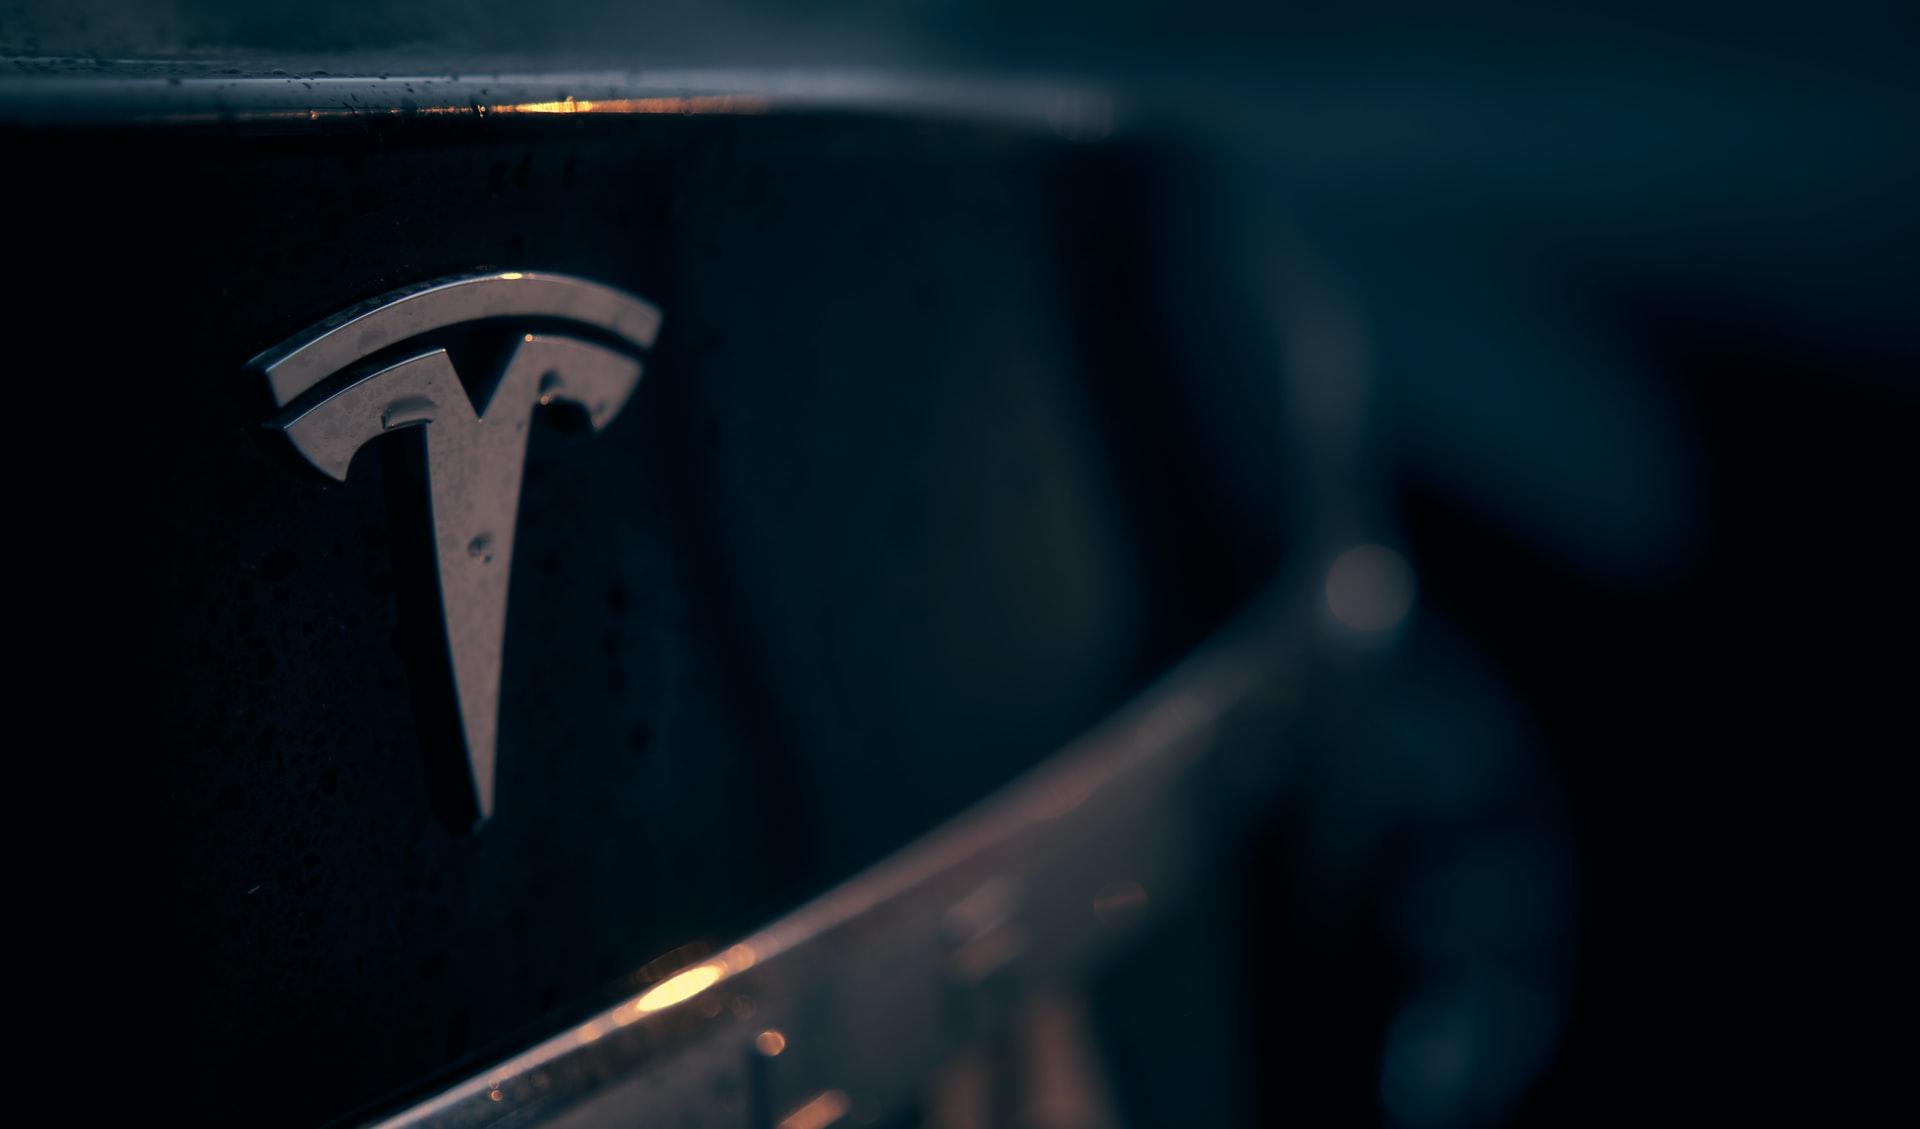 Tesla is looking to sell car insurance in Texas.